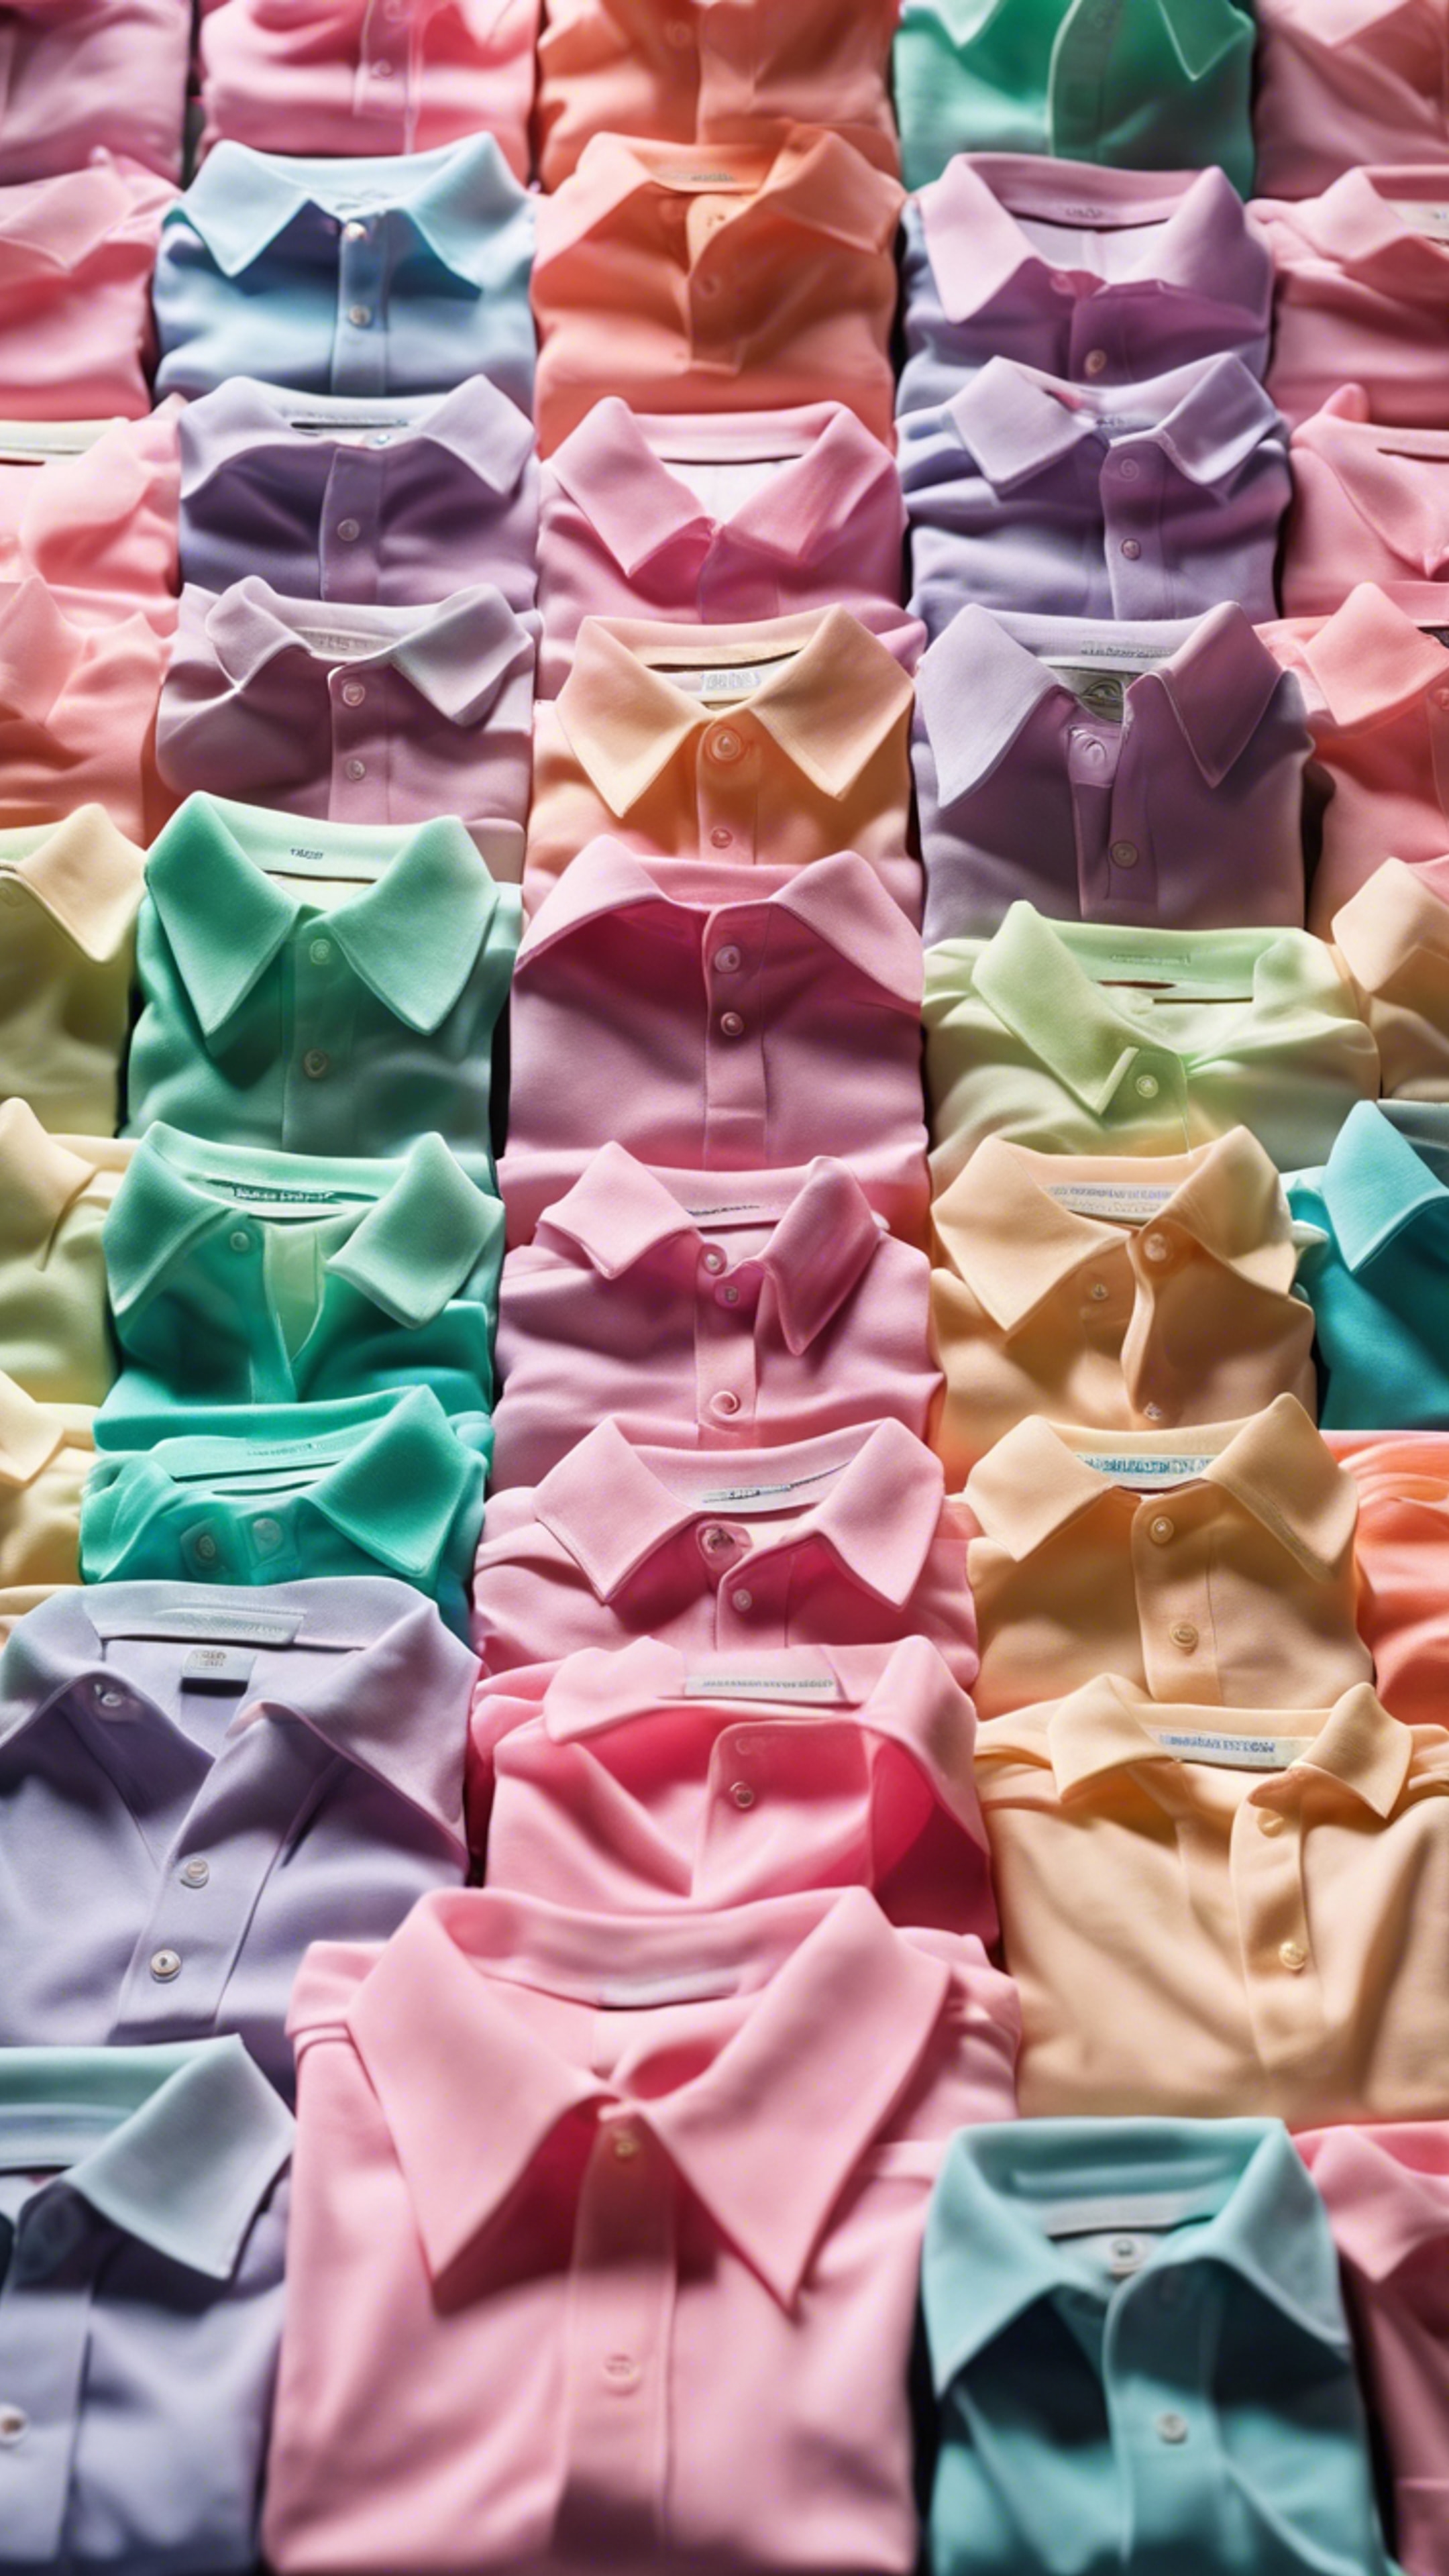 An array of neon pastel polos neatly arranged in a preppy boutique. Wallpaper[90c24010f8ed4e2d91c1]